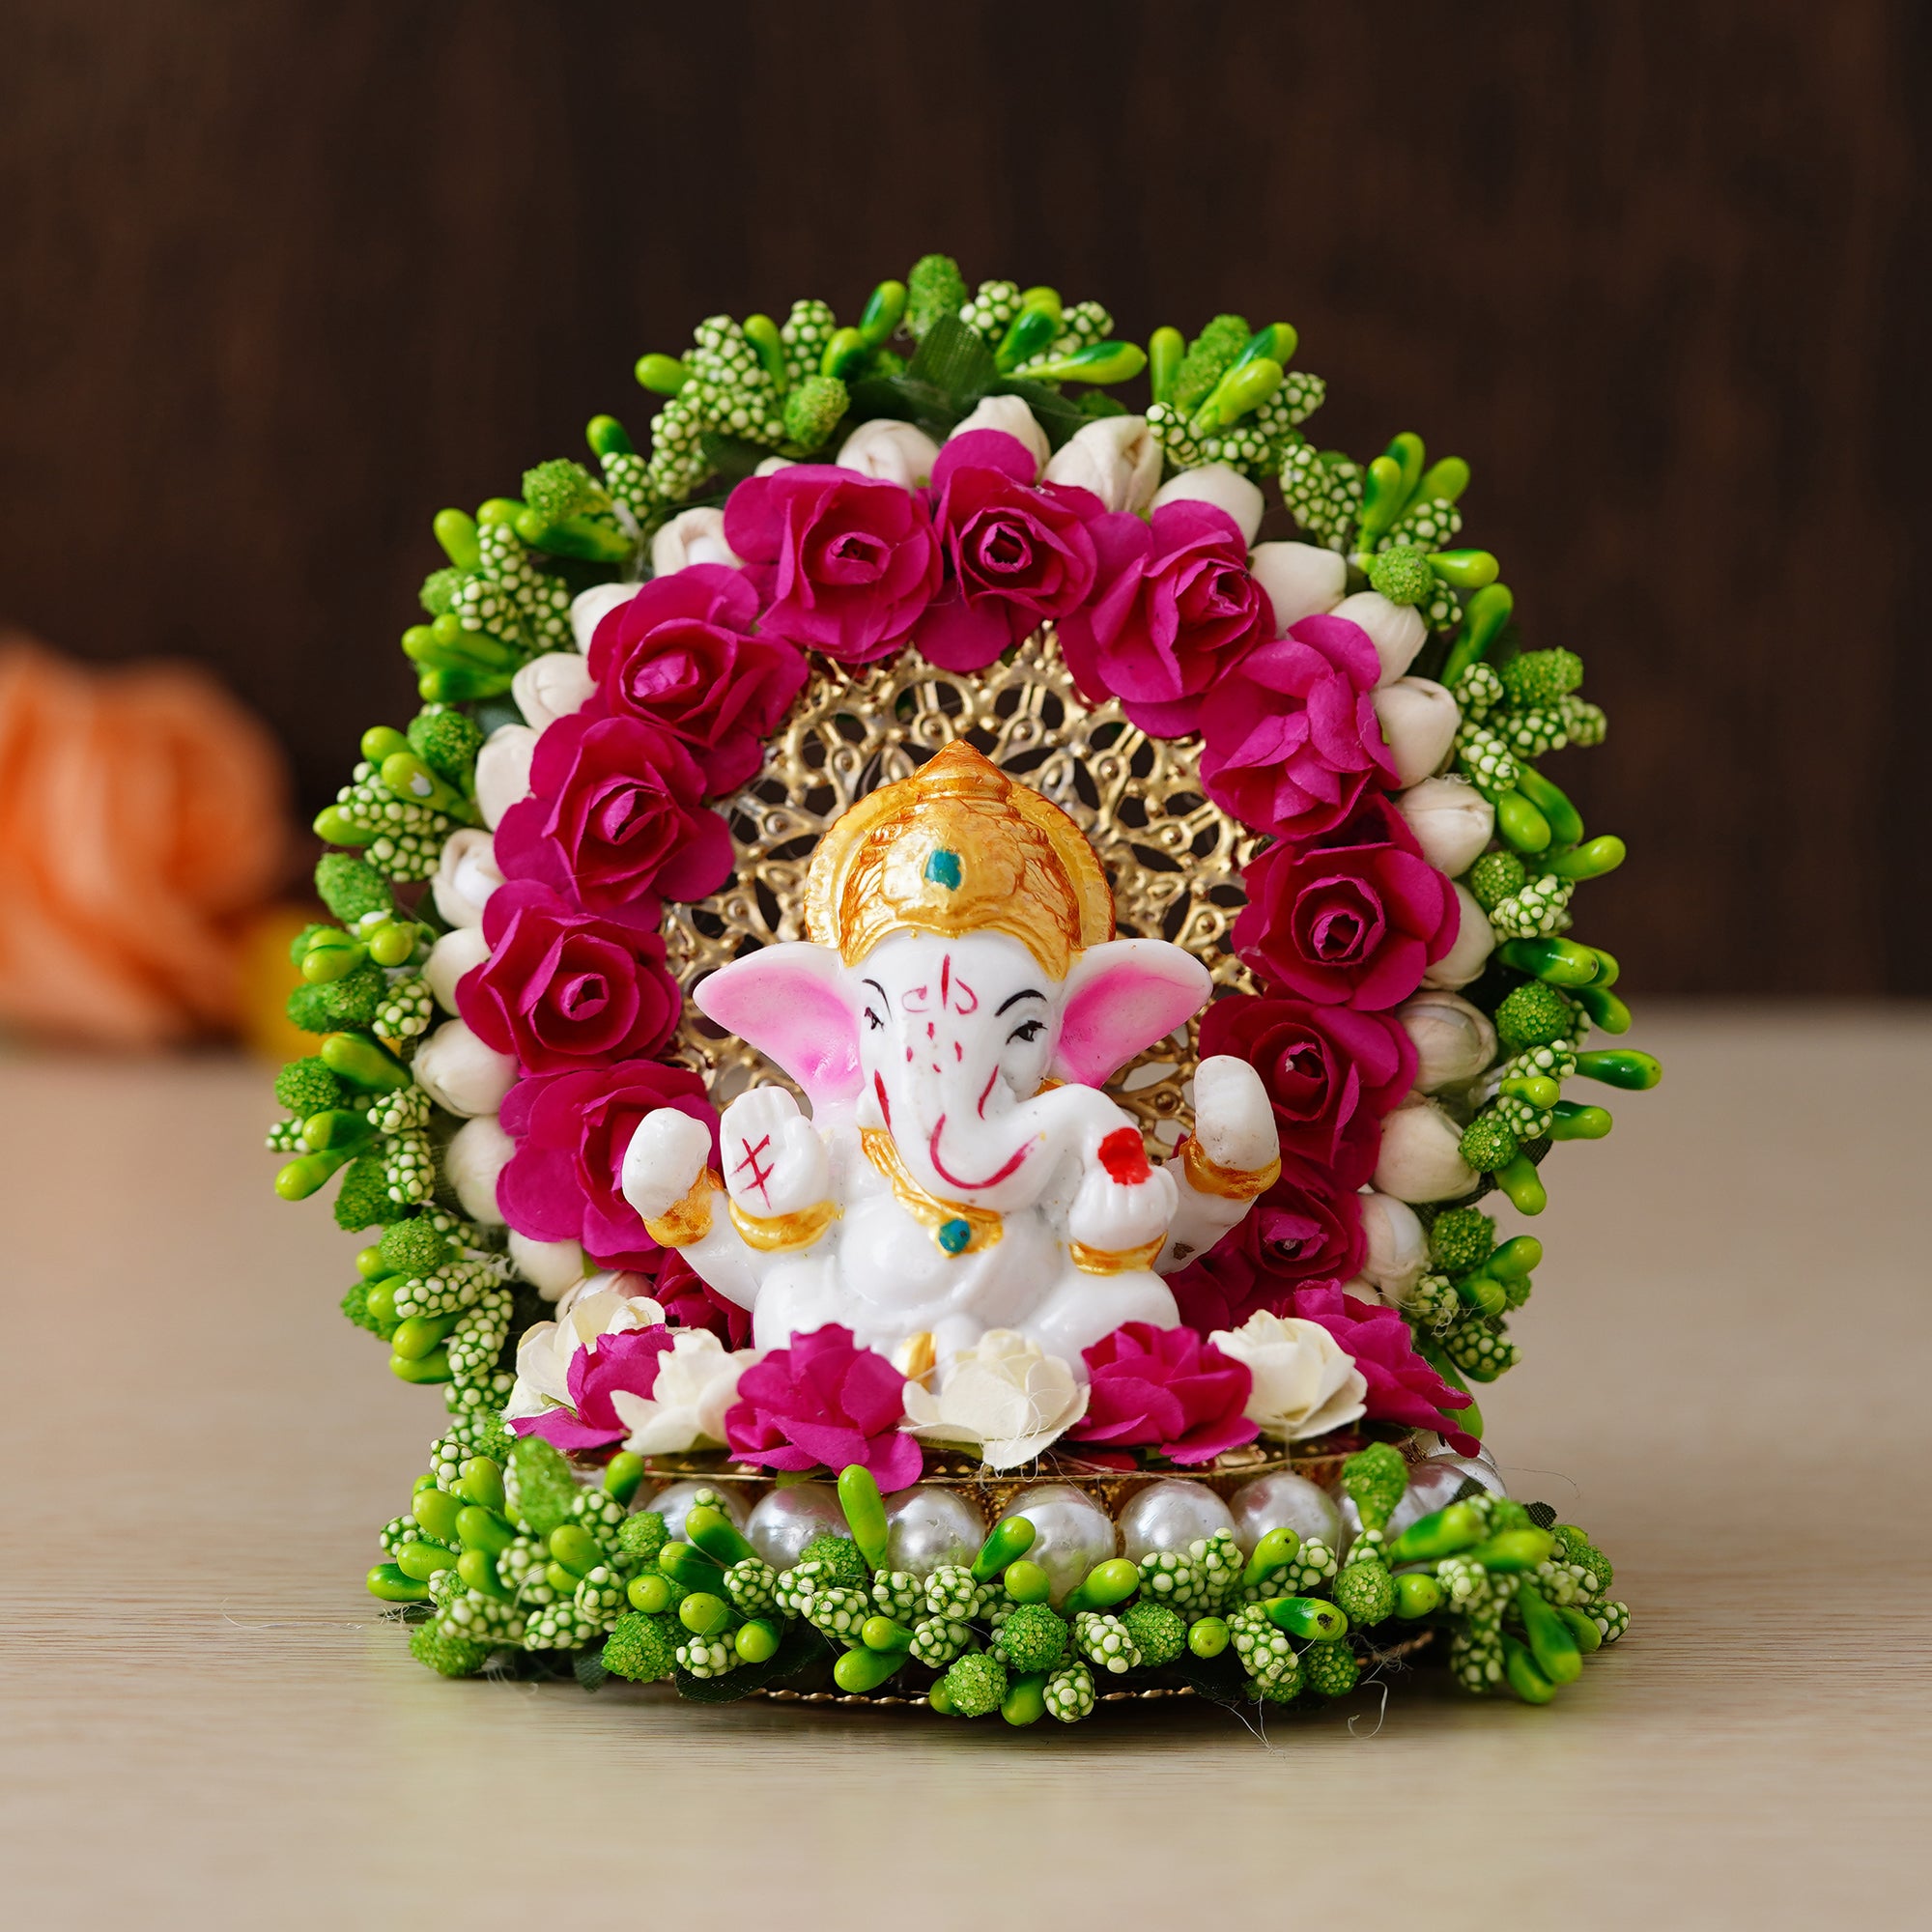 Polyresin Lord Ganesha Idol on Handcrafted Green Floral Plate for Home, Office and Car Dashboard